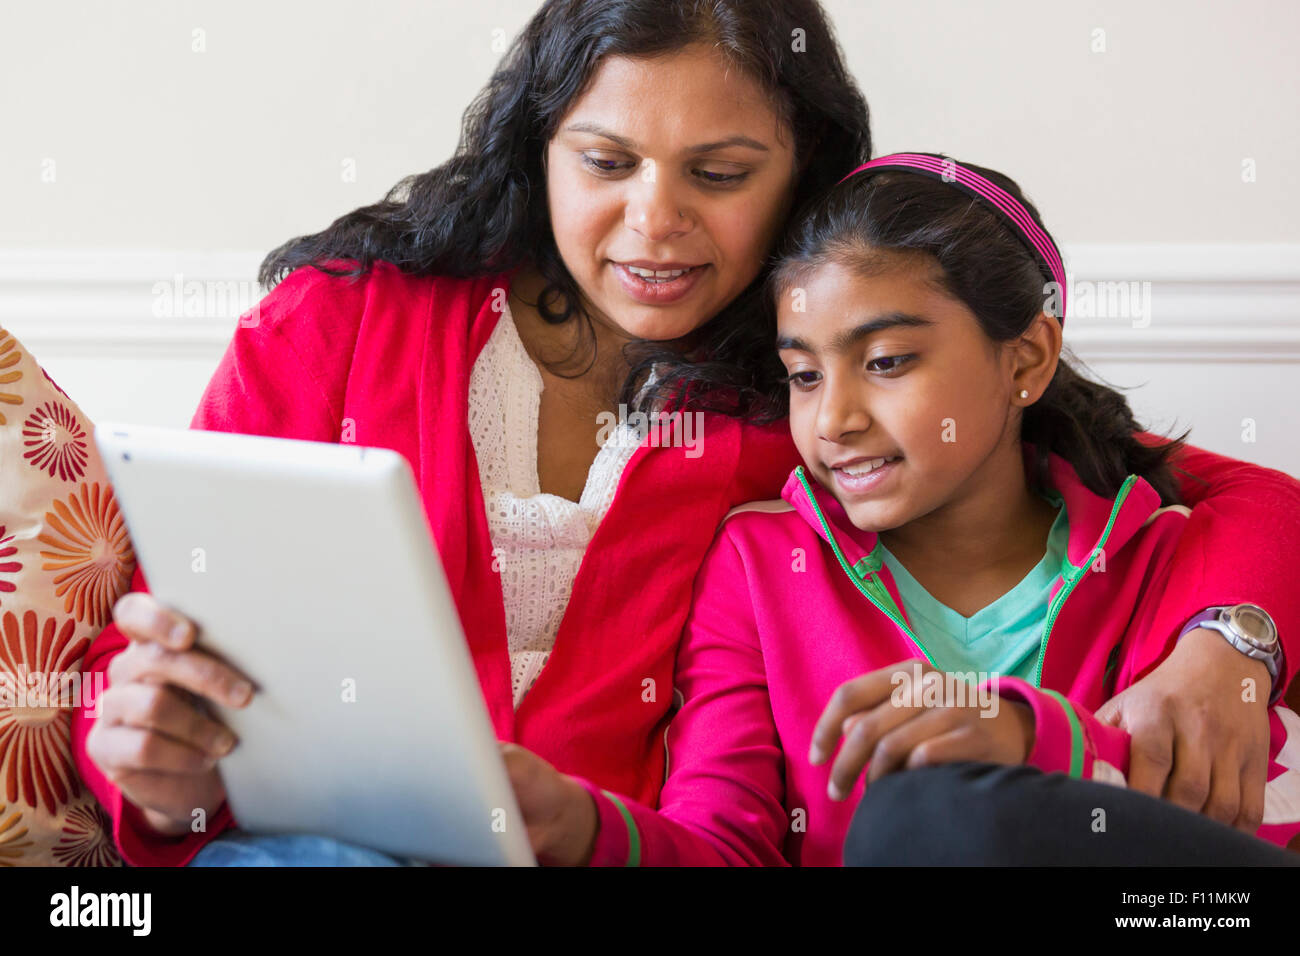 Indian mother and daughter using digital tablet Banque D'Images